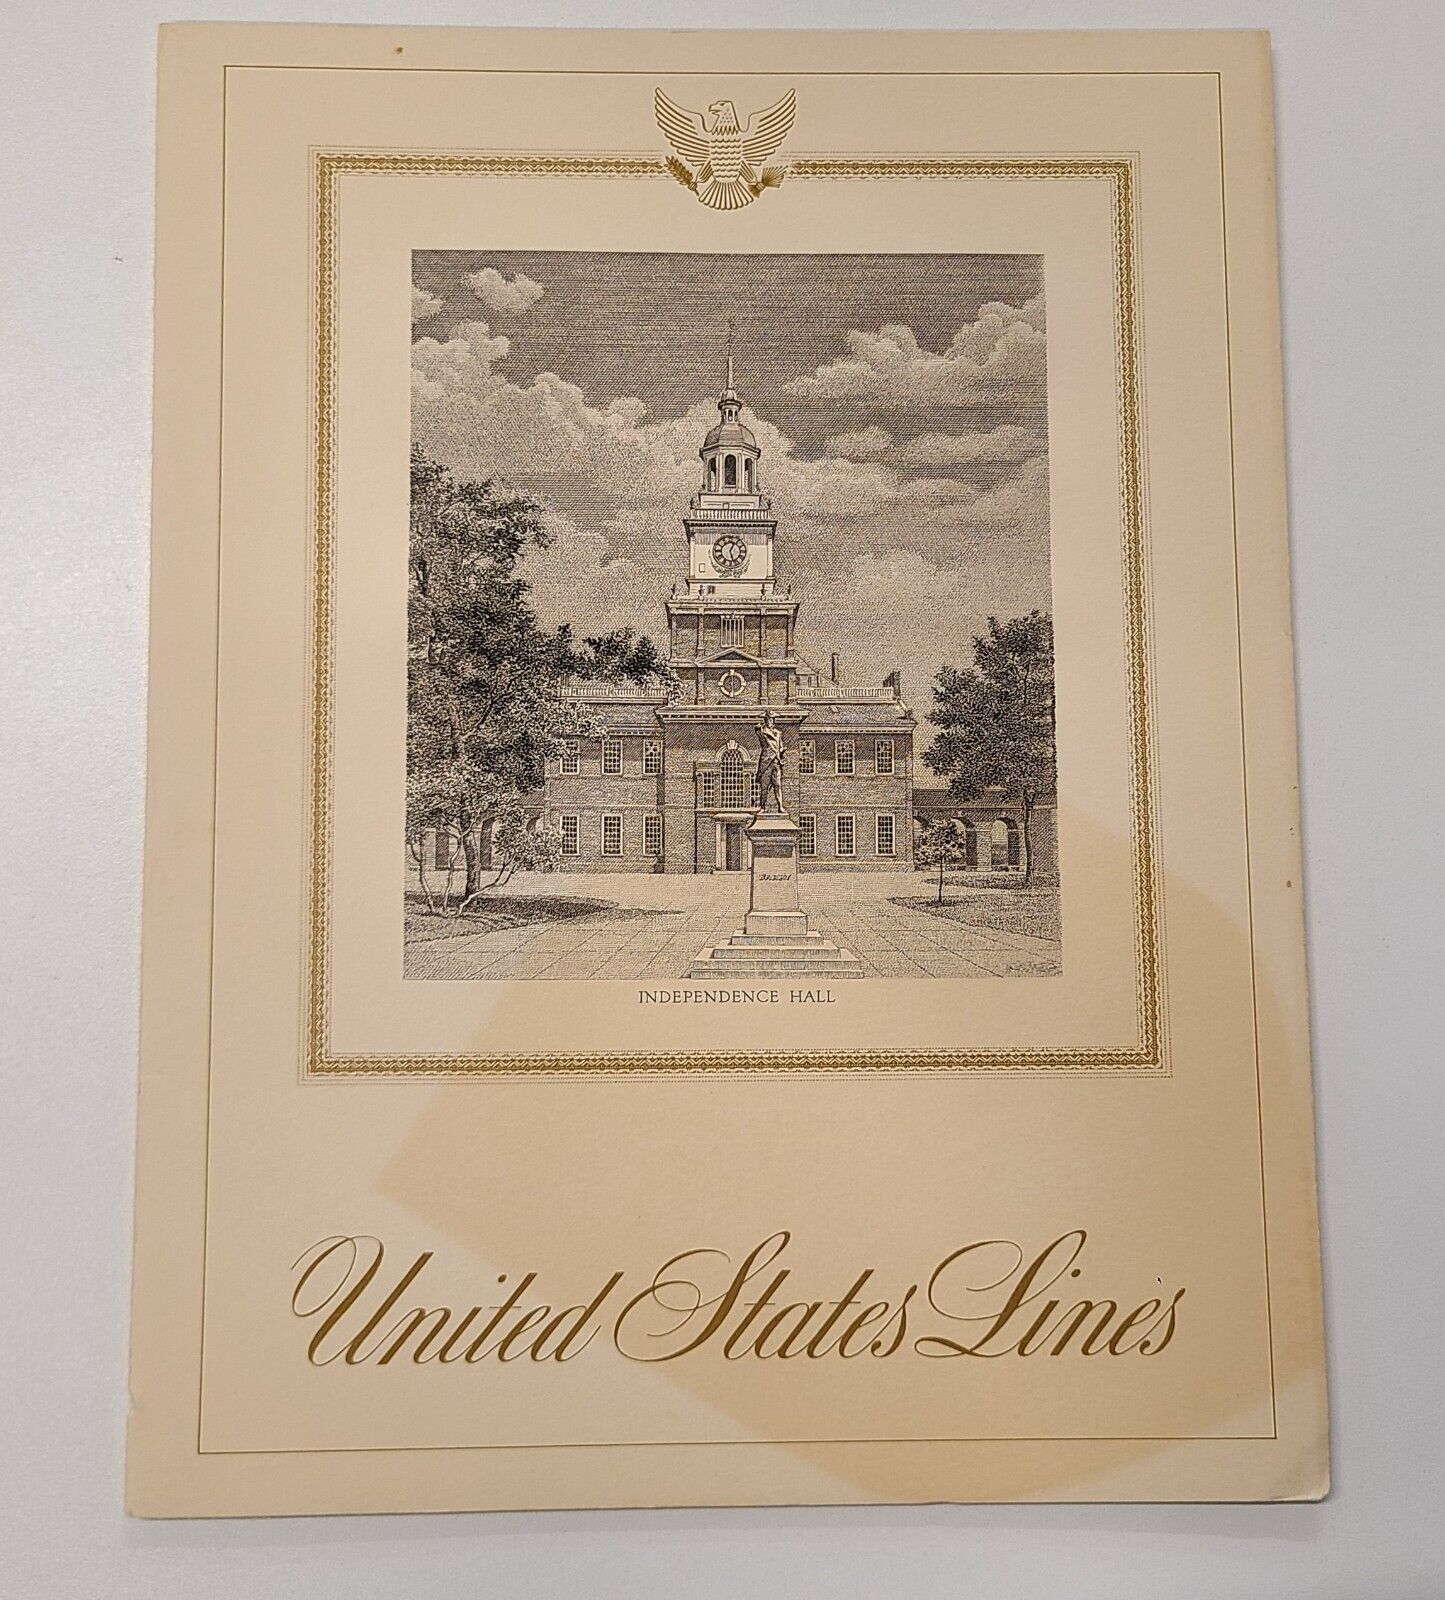 S.S. United States Lunch Menu (Aug 3rd, 1967)